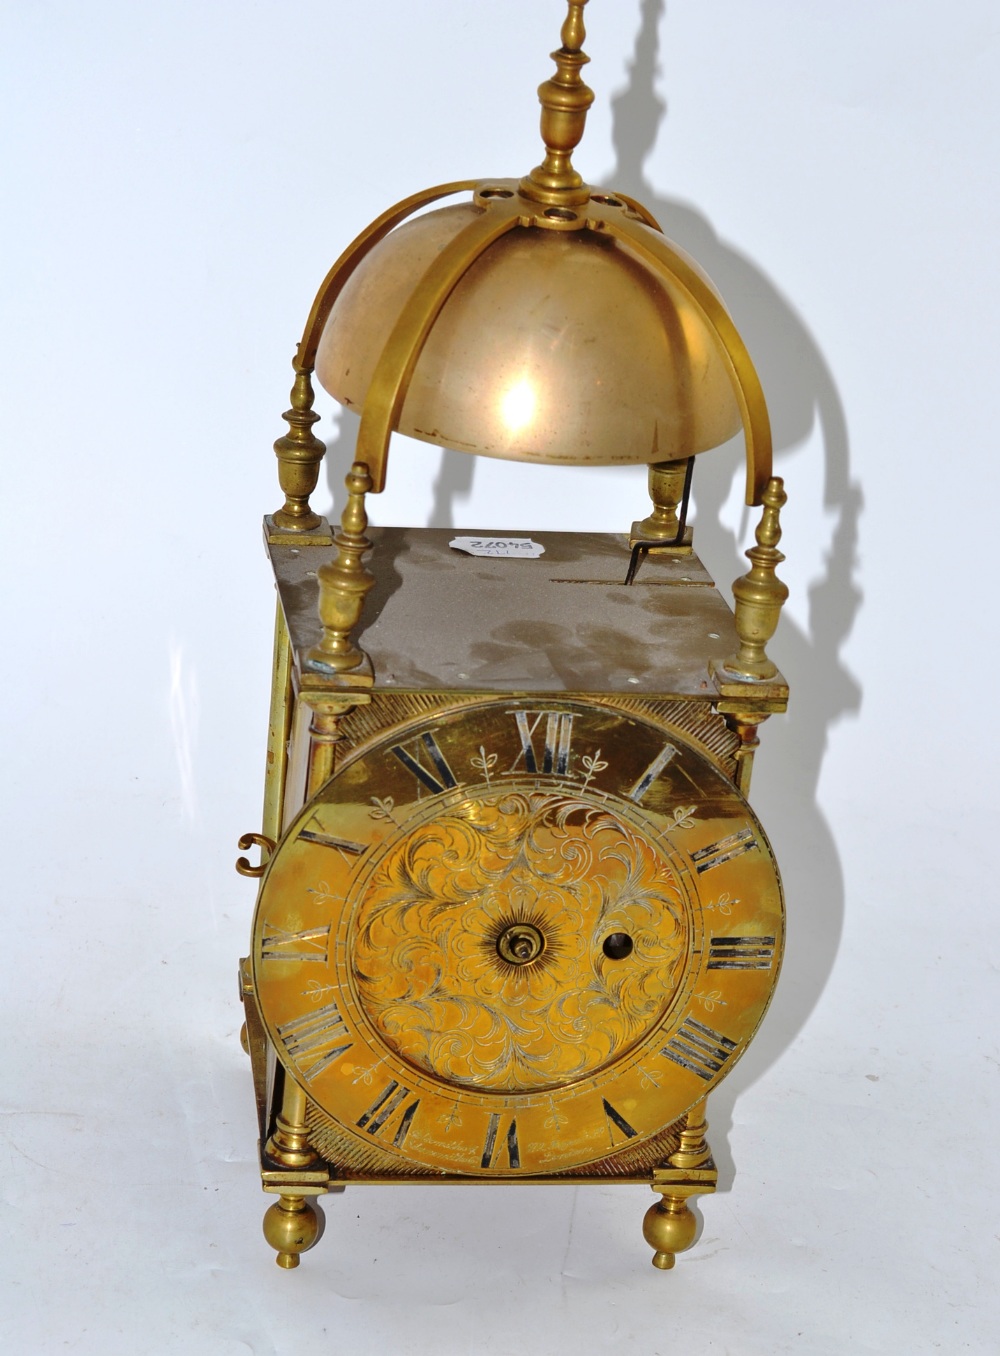 A single fusee lantern clock by the Goldsmiths and Silversmiths Company, London, (a.f.)